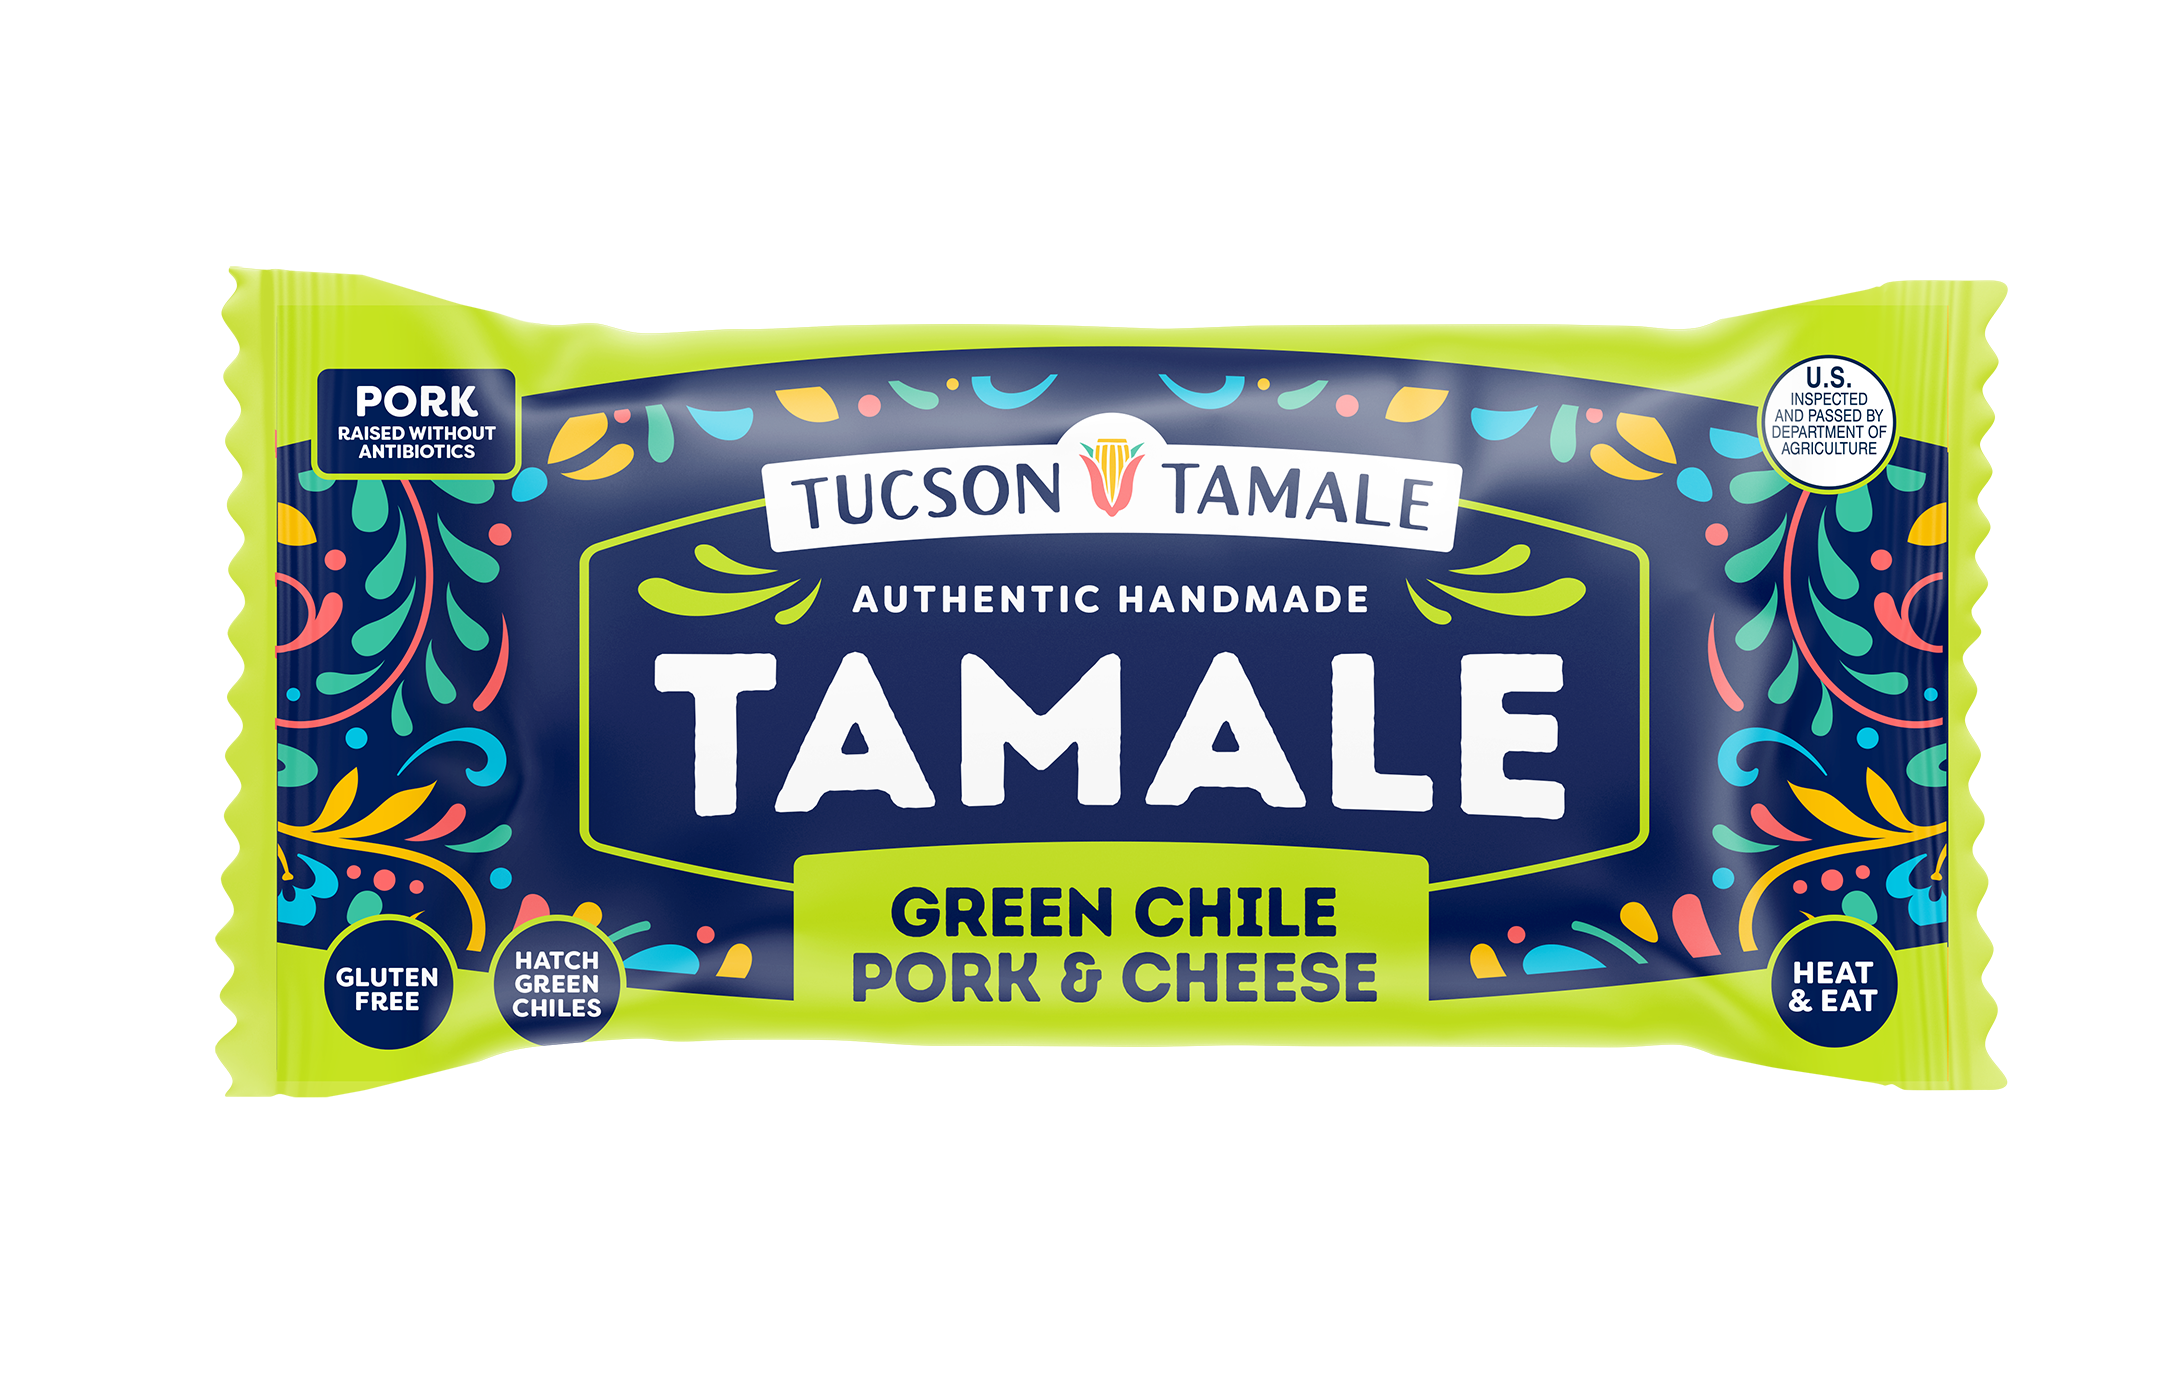 Tucson Green Chile Pork And Chese Tamale 5 Oz